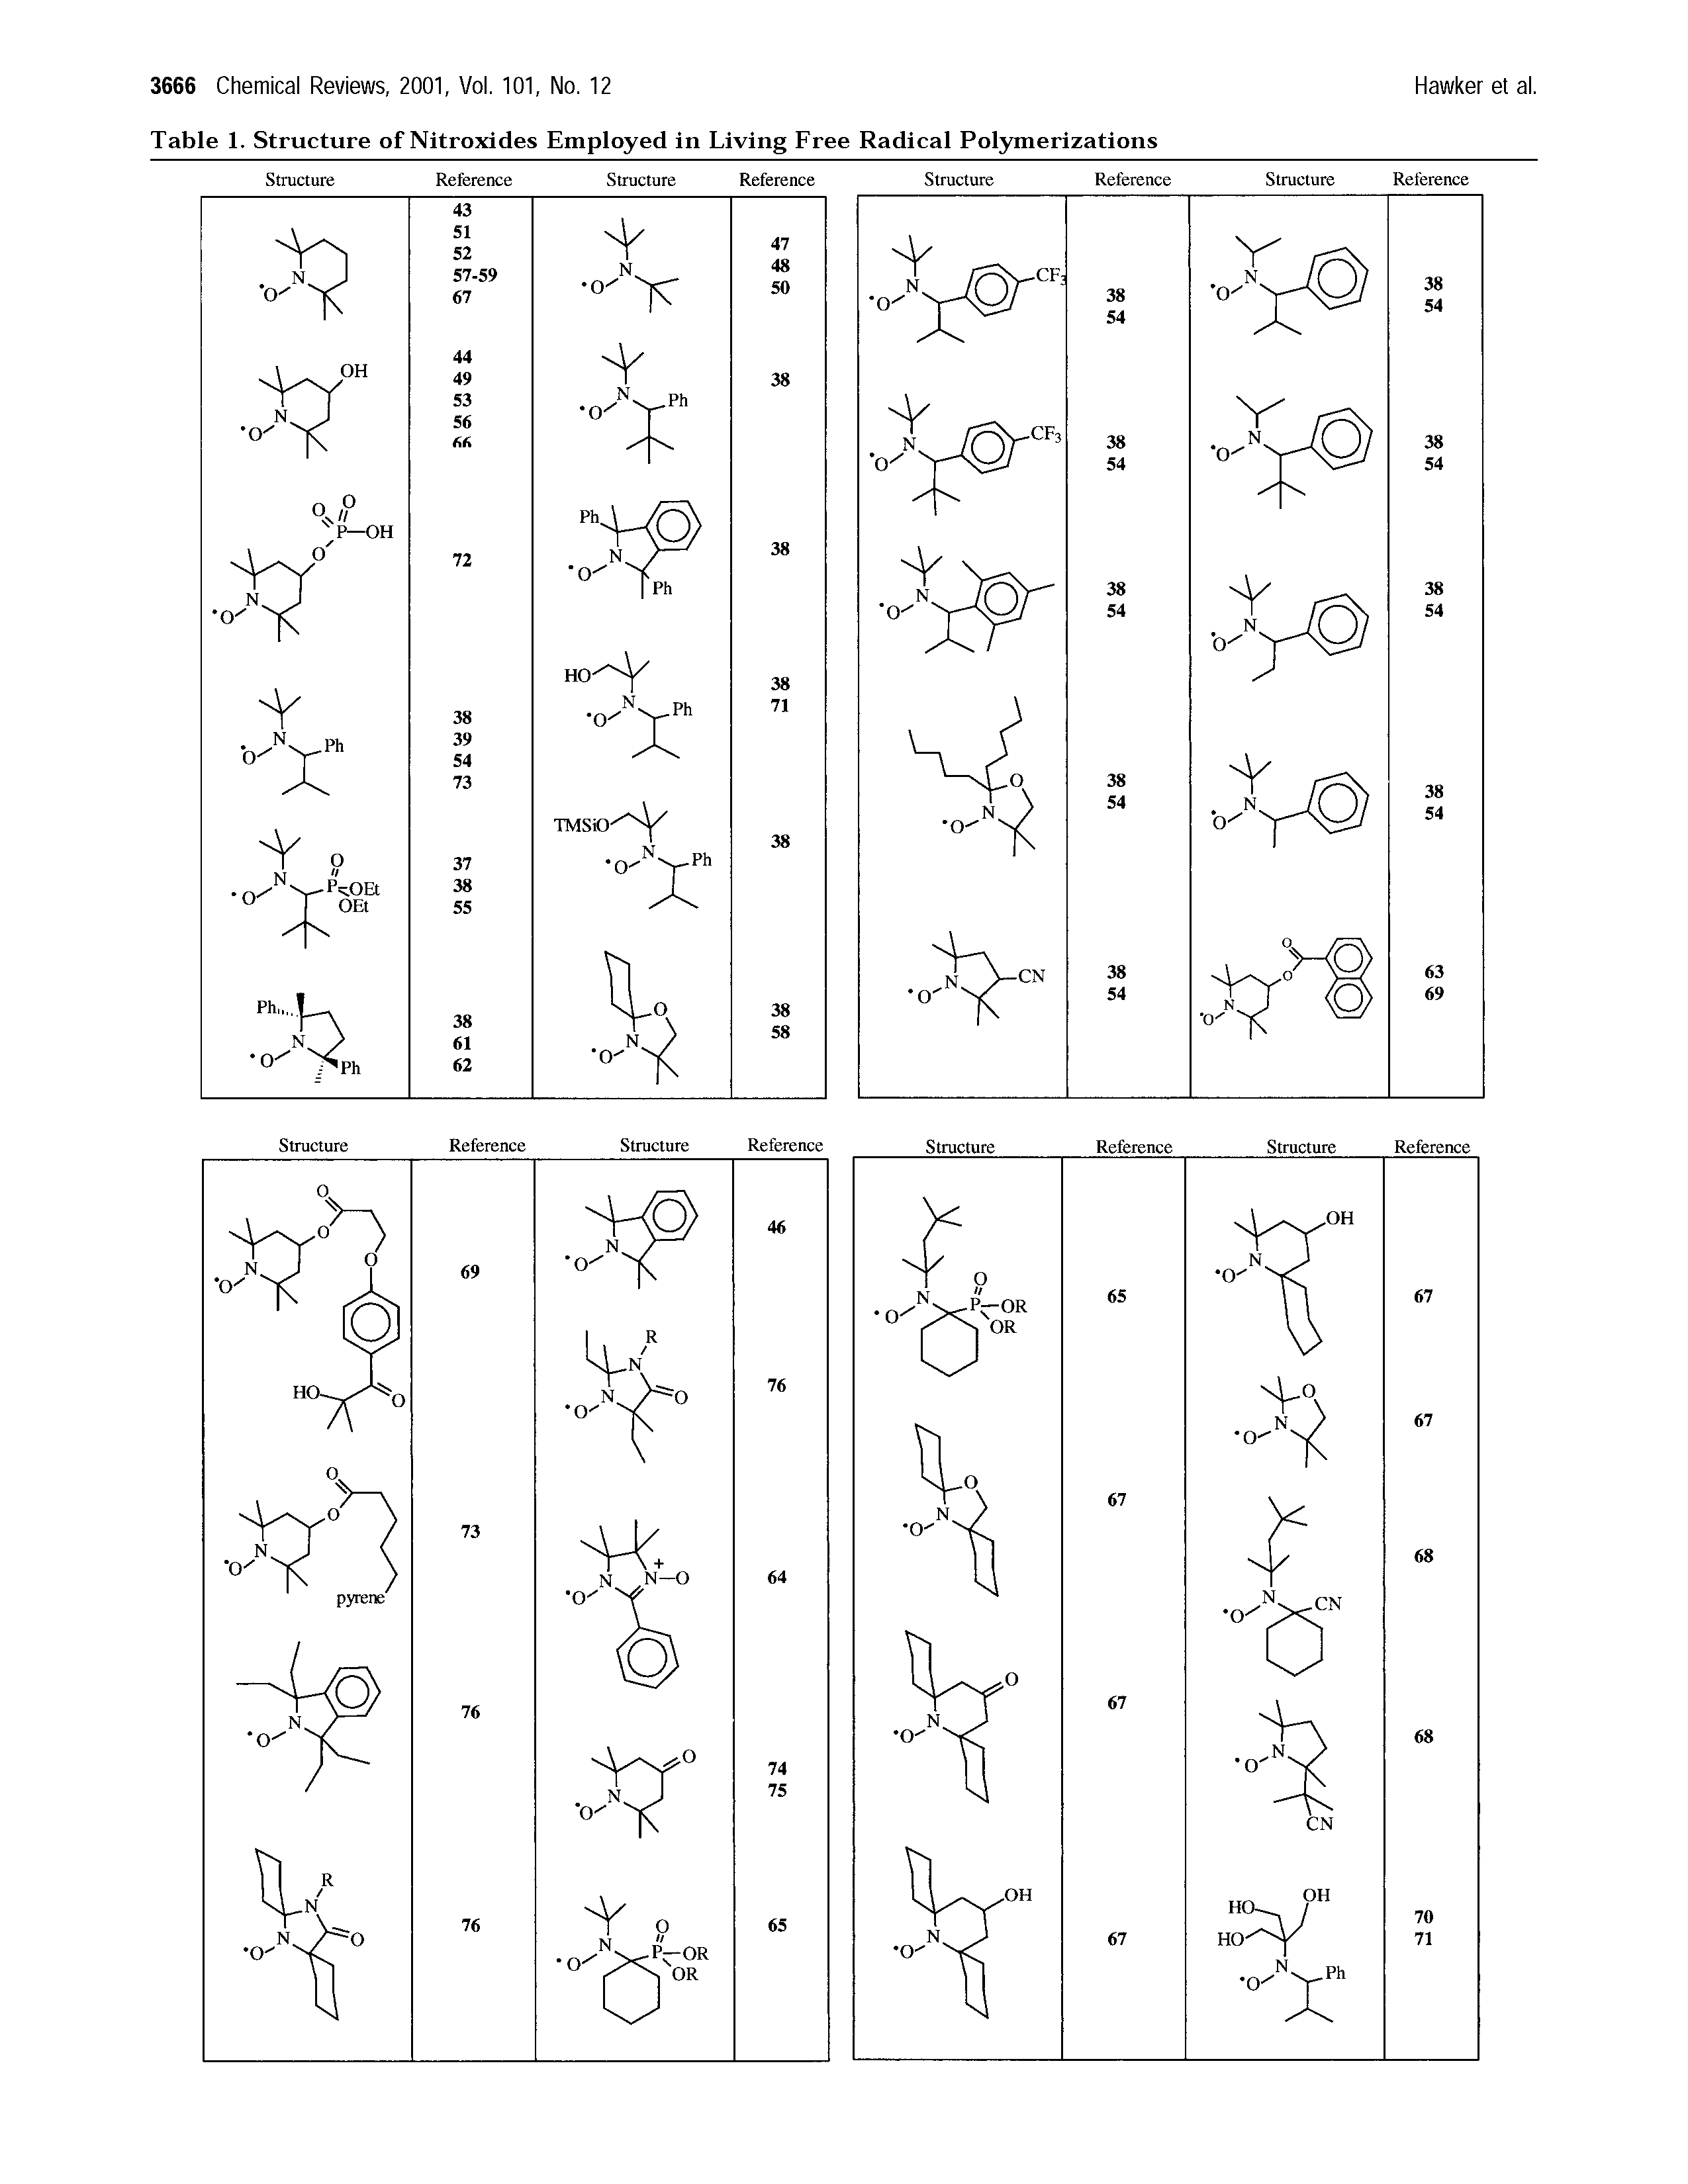 Table 1. Structure of Nitroxides Employed in Living Free Radical Polymerizations...